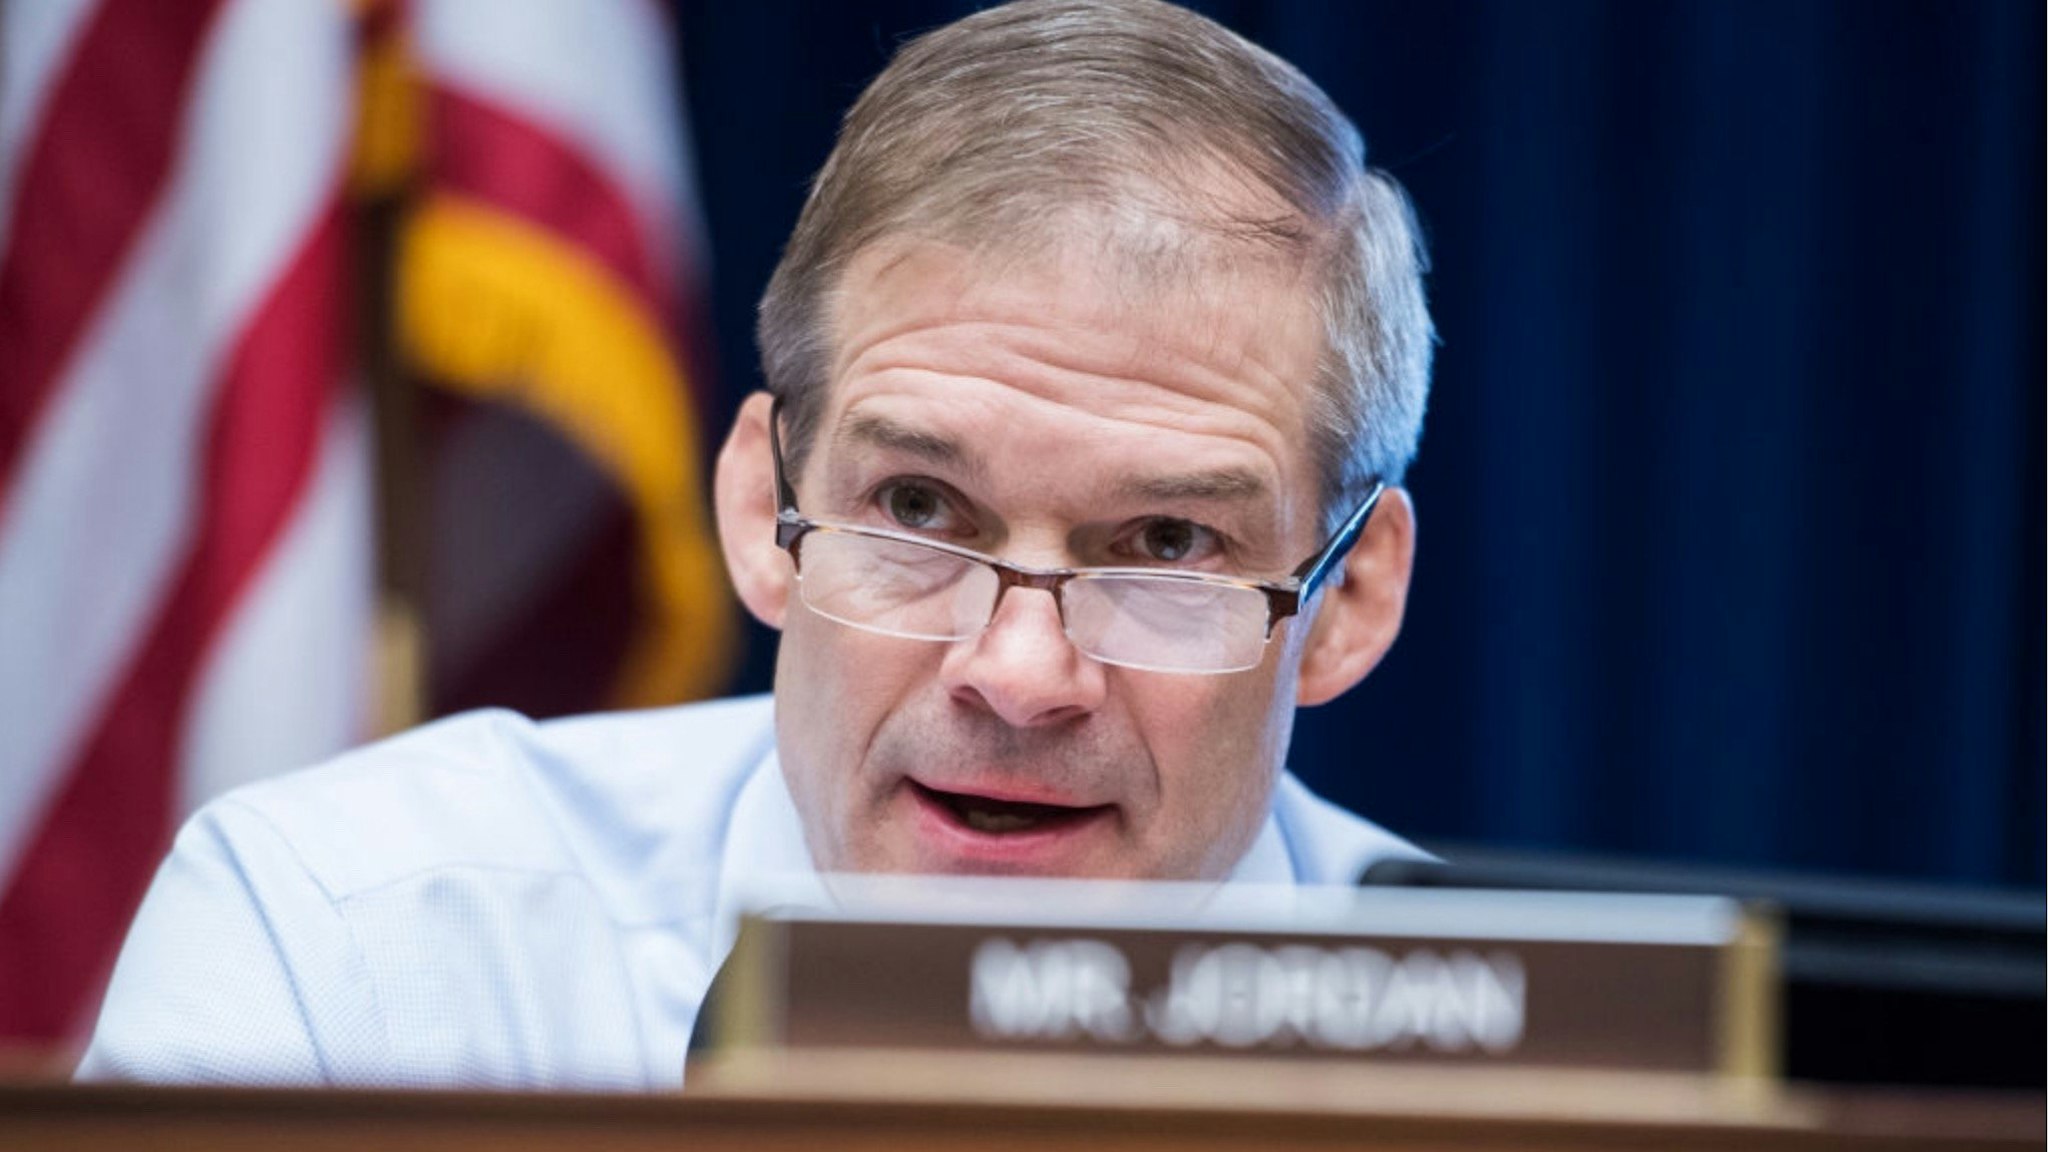 Ranking member Rep. Jim Jordan, R-Ohio, attends a House Oversight and Reform Committee hearing in Rayburn Building titled "The Trump Administration's Response to the Drug Crisis, Part II," on Thursday, May 9, 2019.